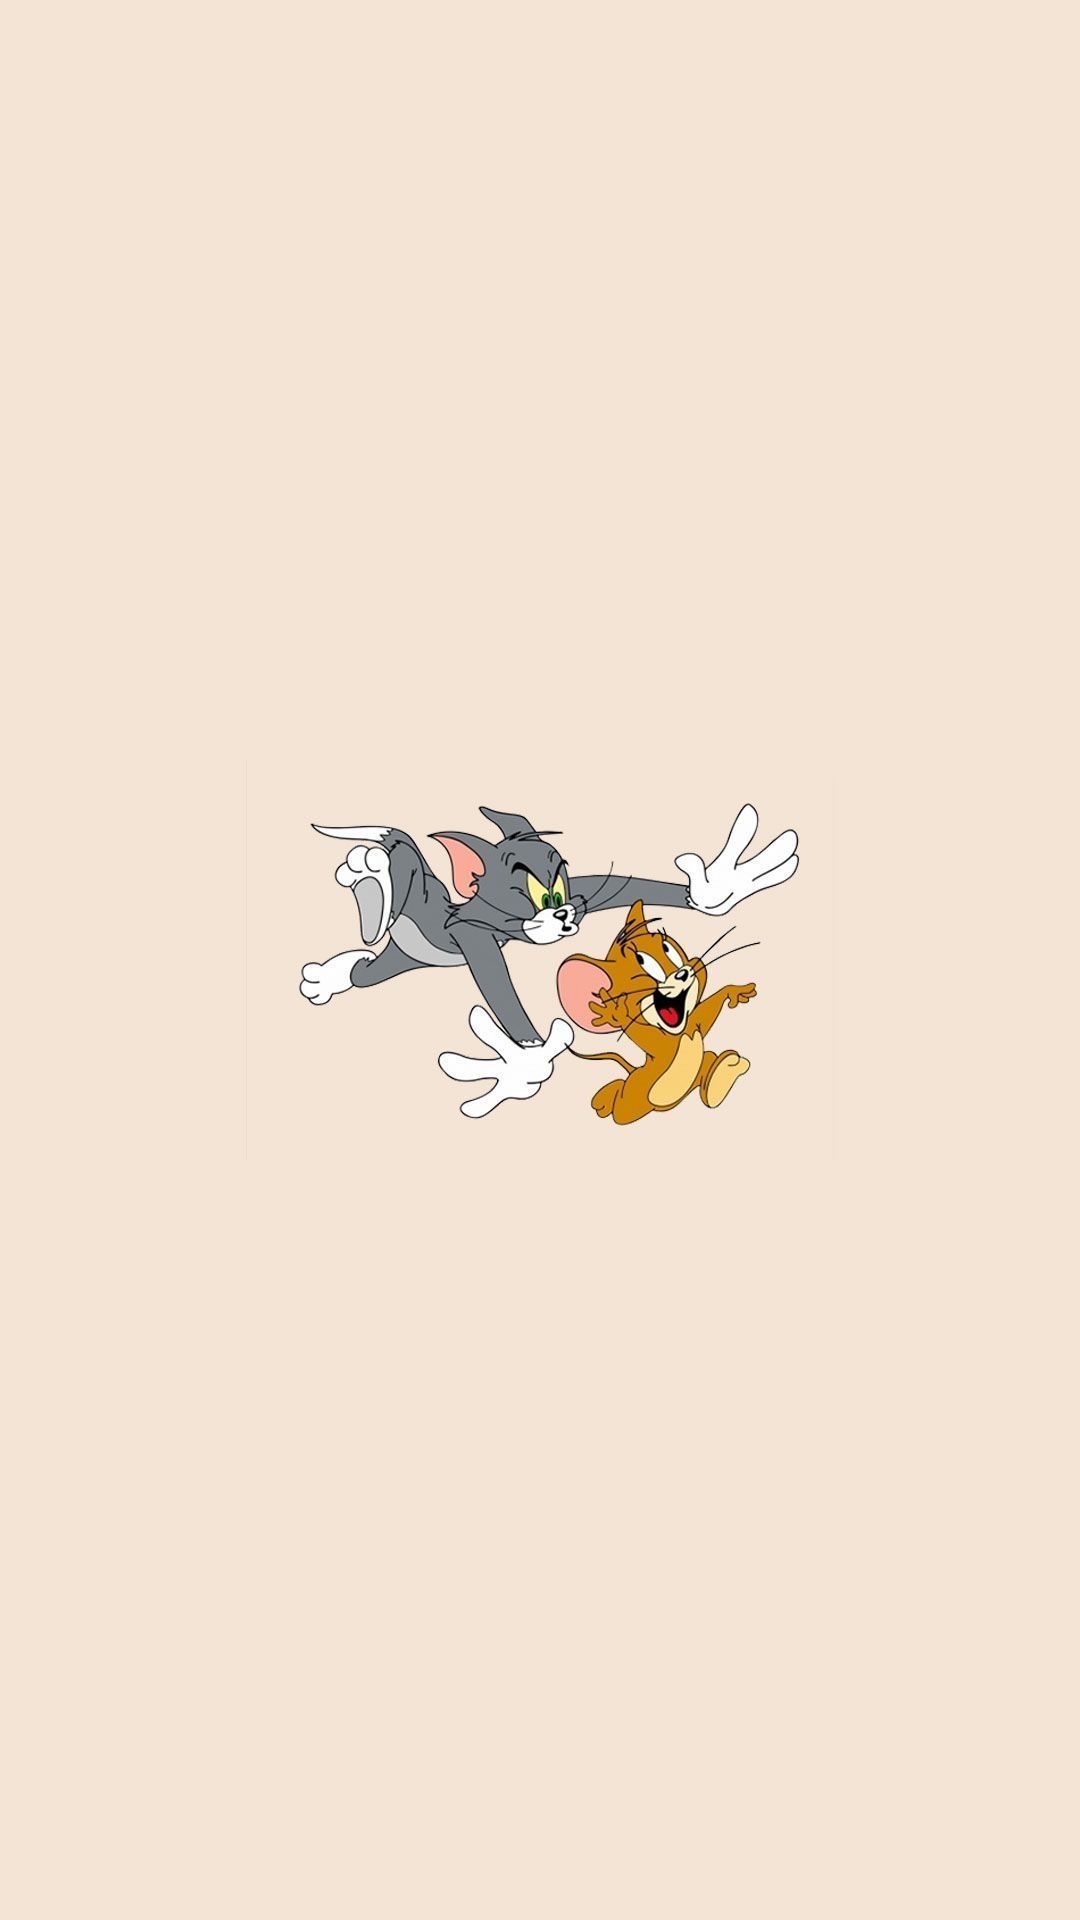 Tom And Jerry Cartoon Confused Face Wallpaper Download